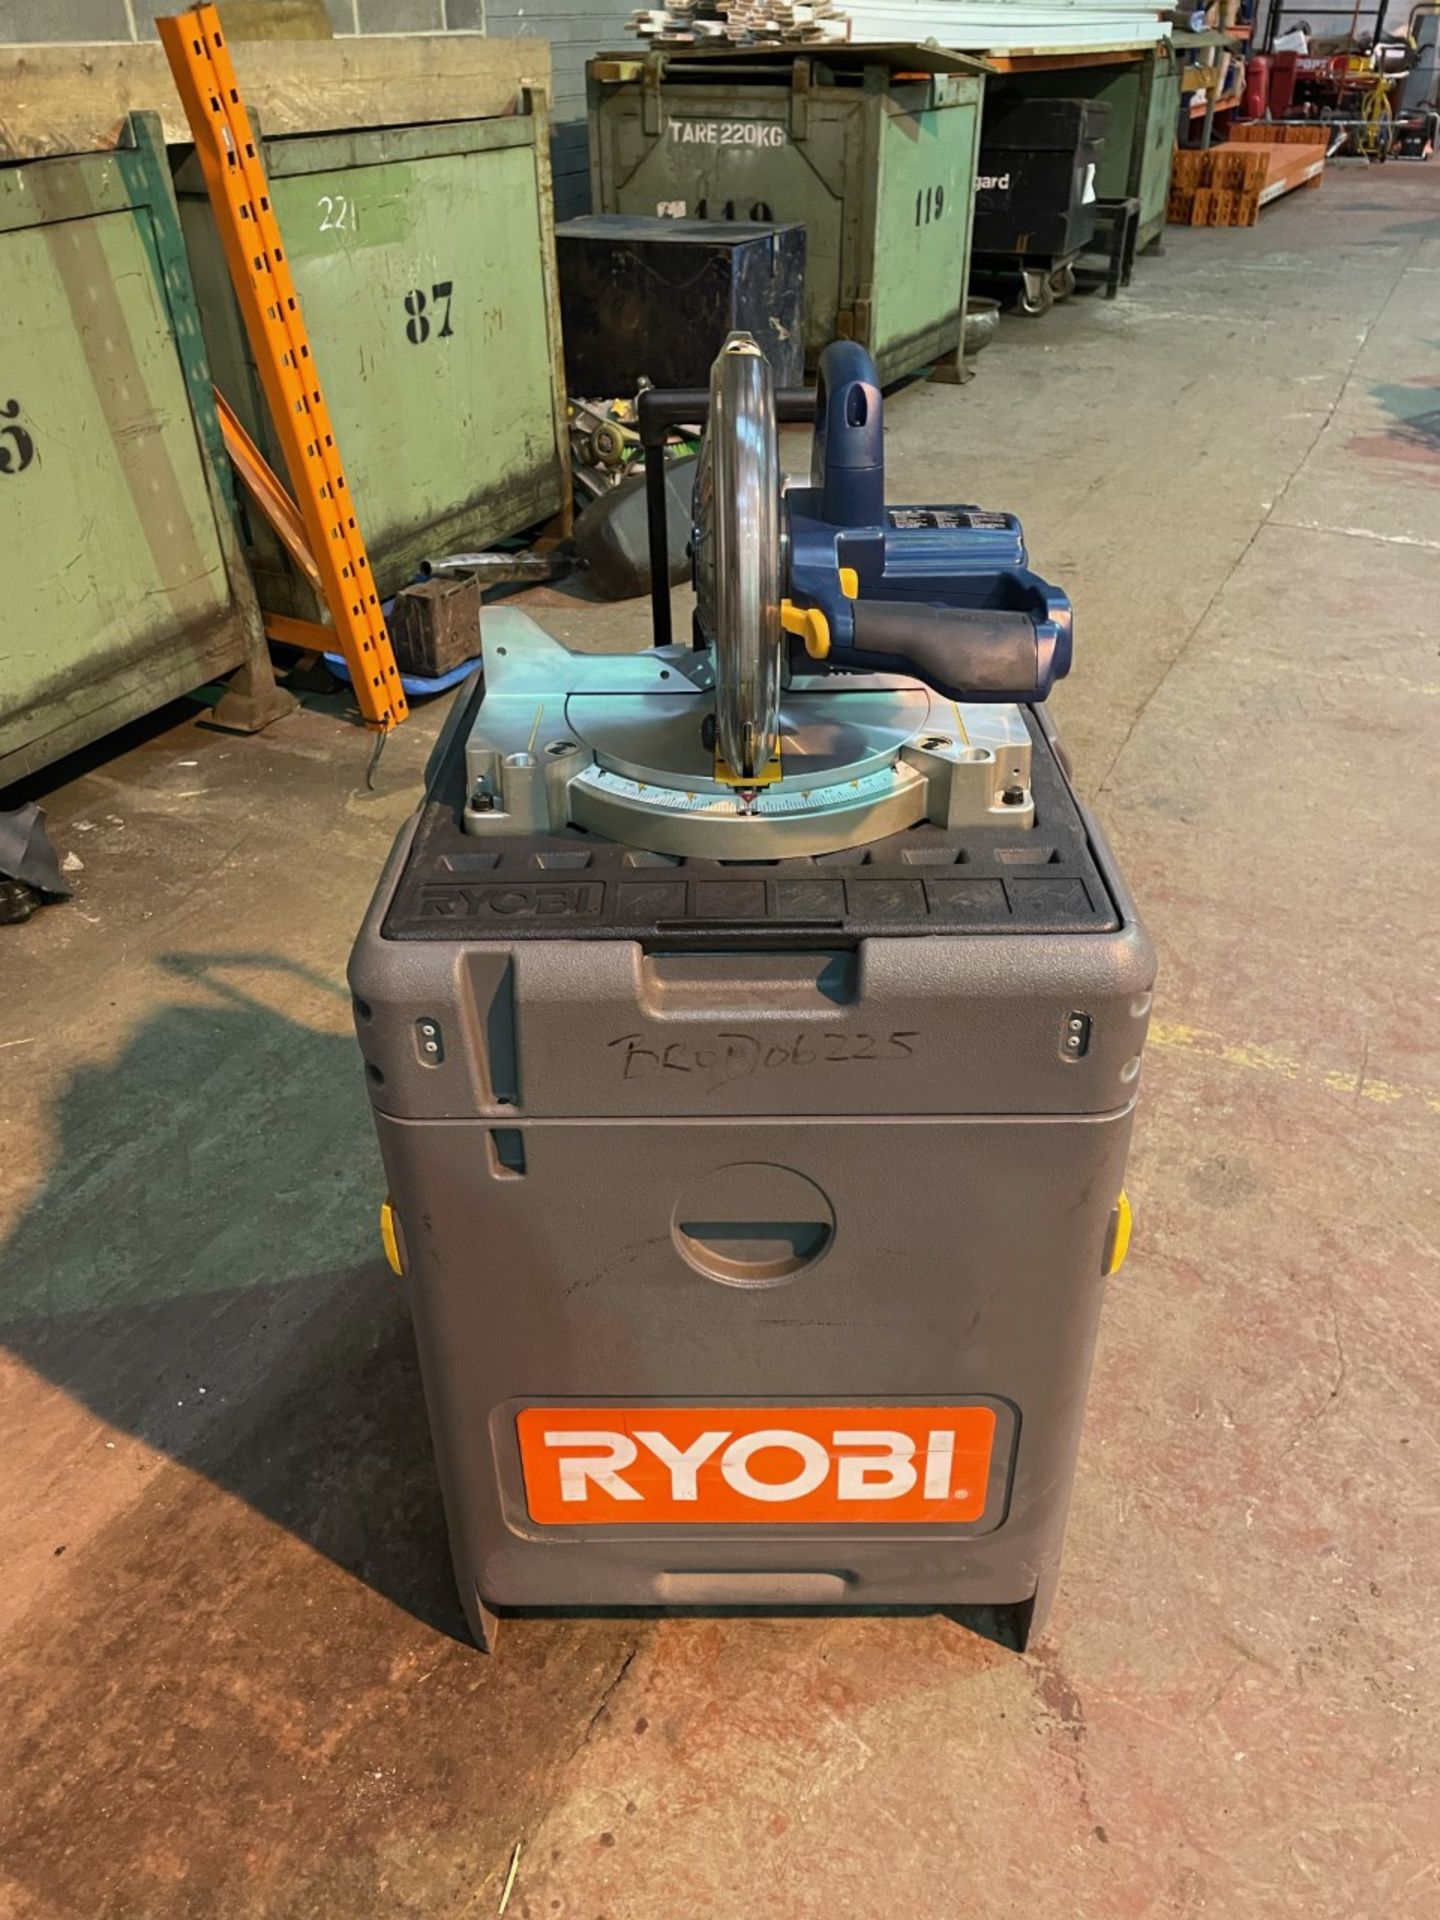 Ryobi mobile work station with 18v mitre saw. Saw blade never been used. Battery not included